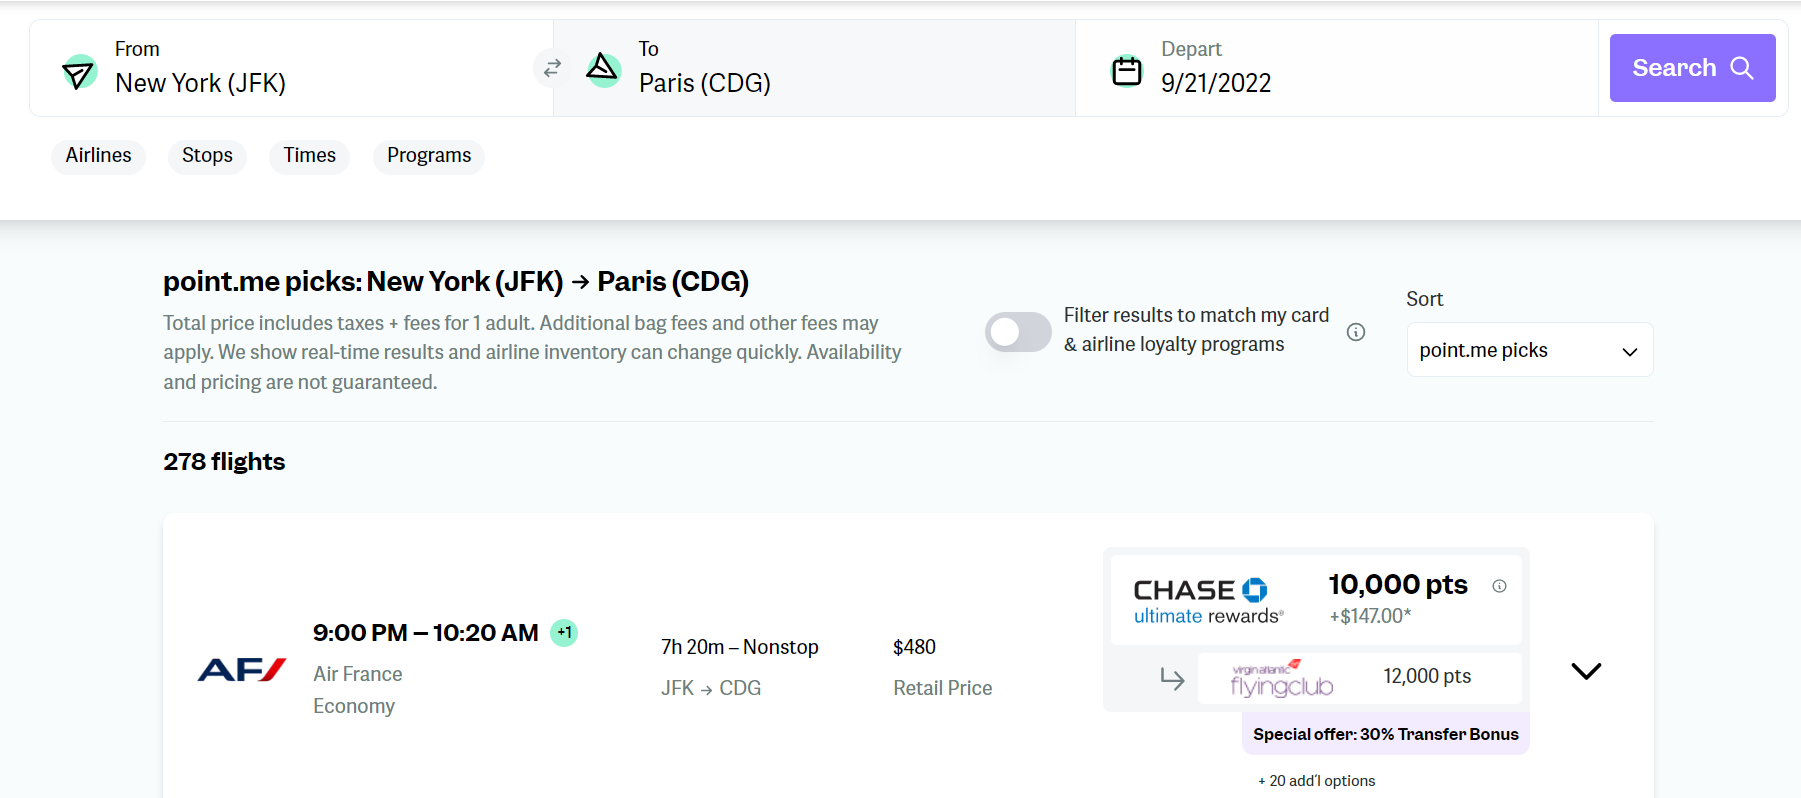 Finished search result from JFK to CDG, showing the top flight result, a non-stop flight for 10,000 points and $147 USD.